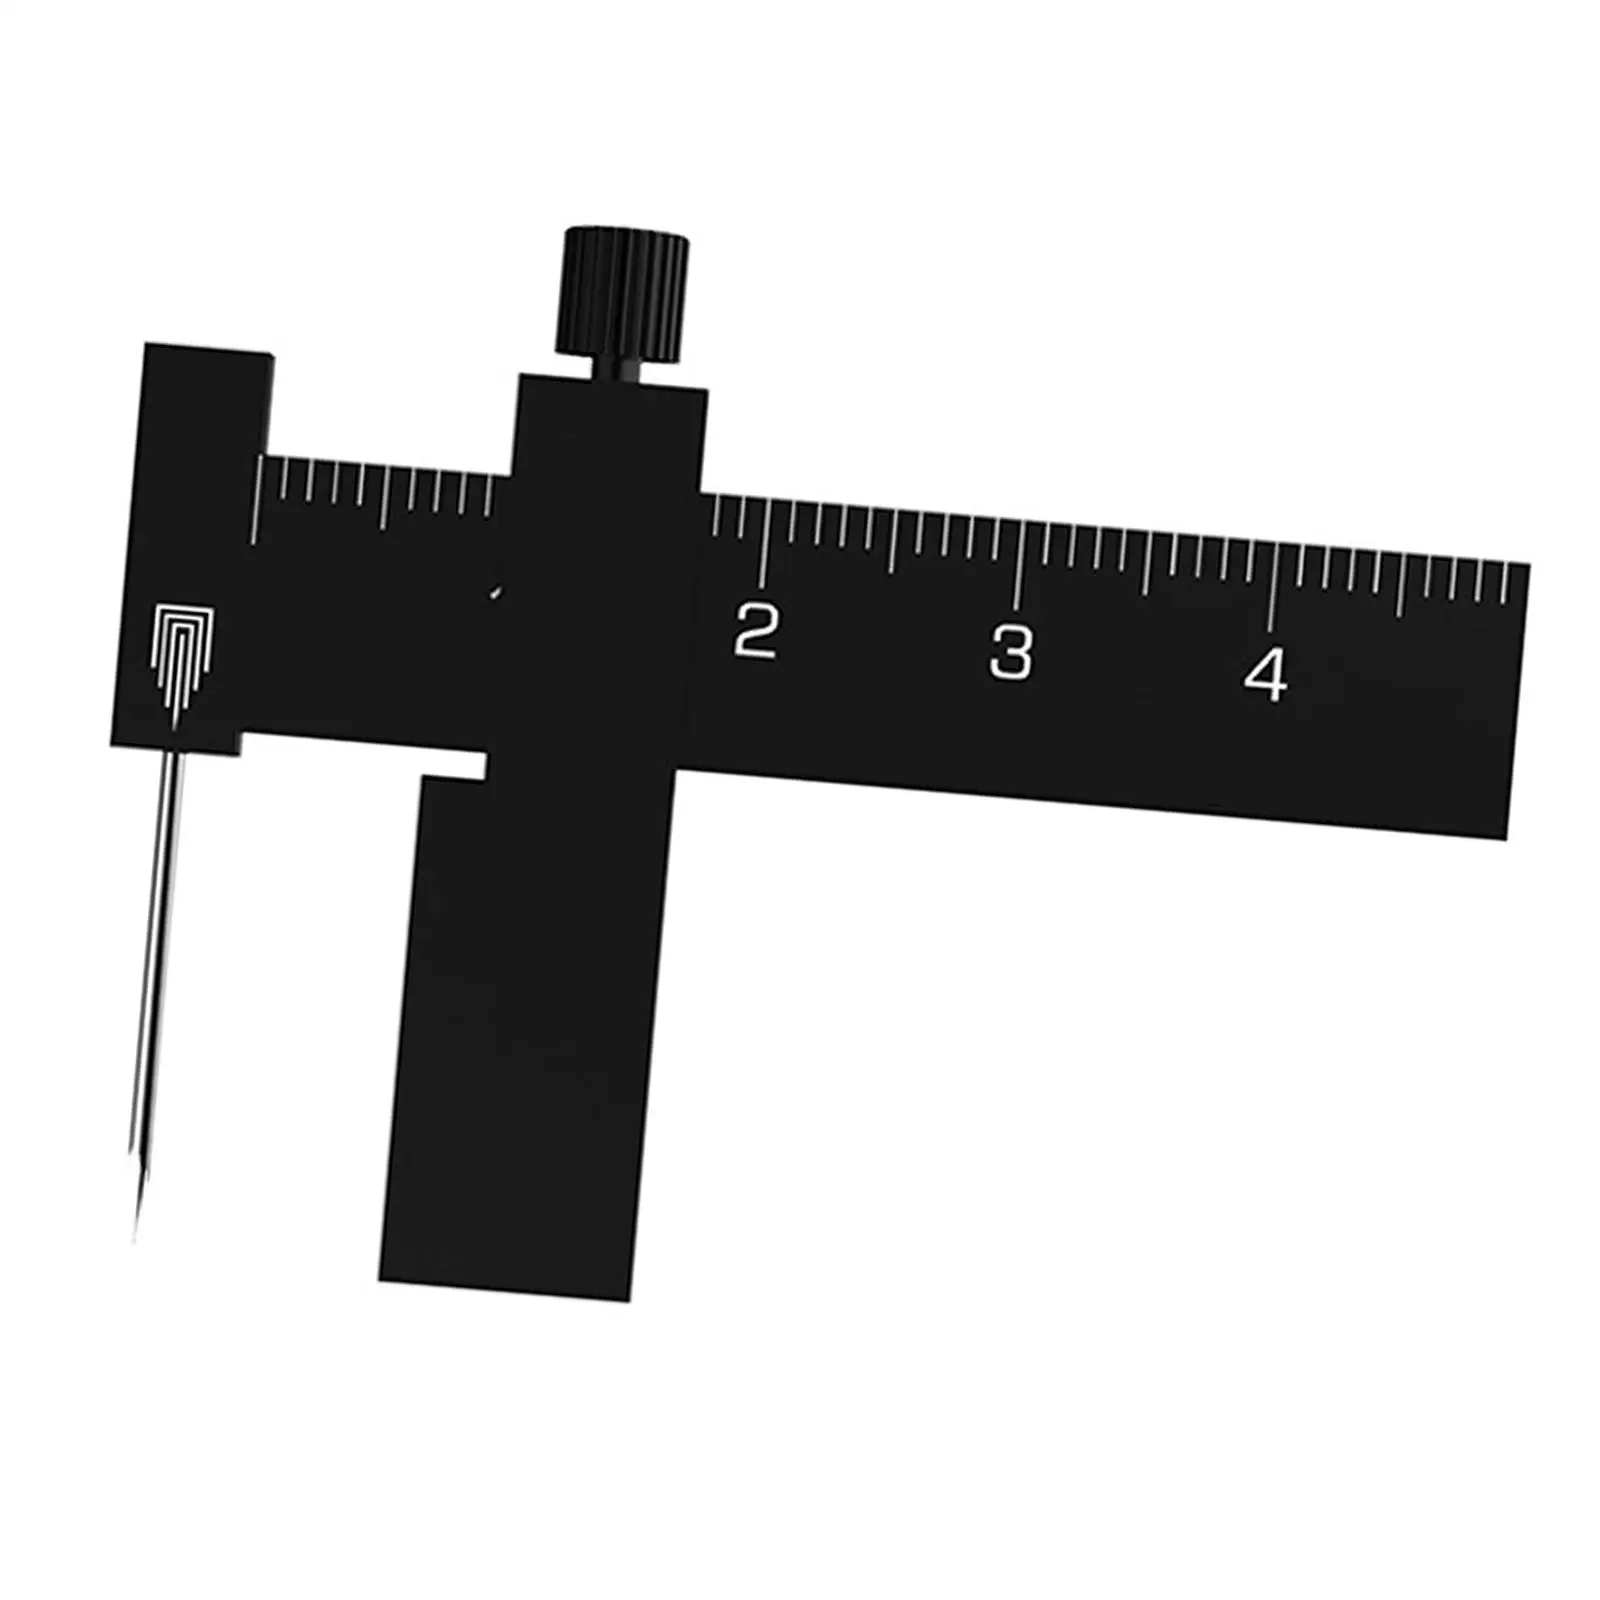 Equidistant Parallel Scriber Engraving Ruler T14A02 Line Gauge Professional DIY Carving Line Tool Auxiliary Ruler for Mechanical